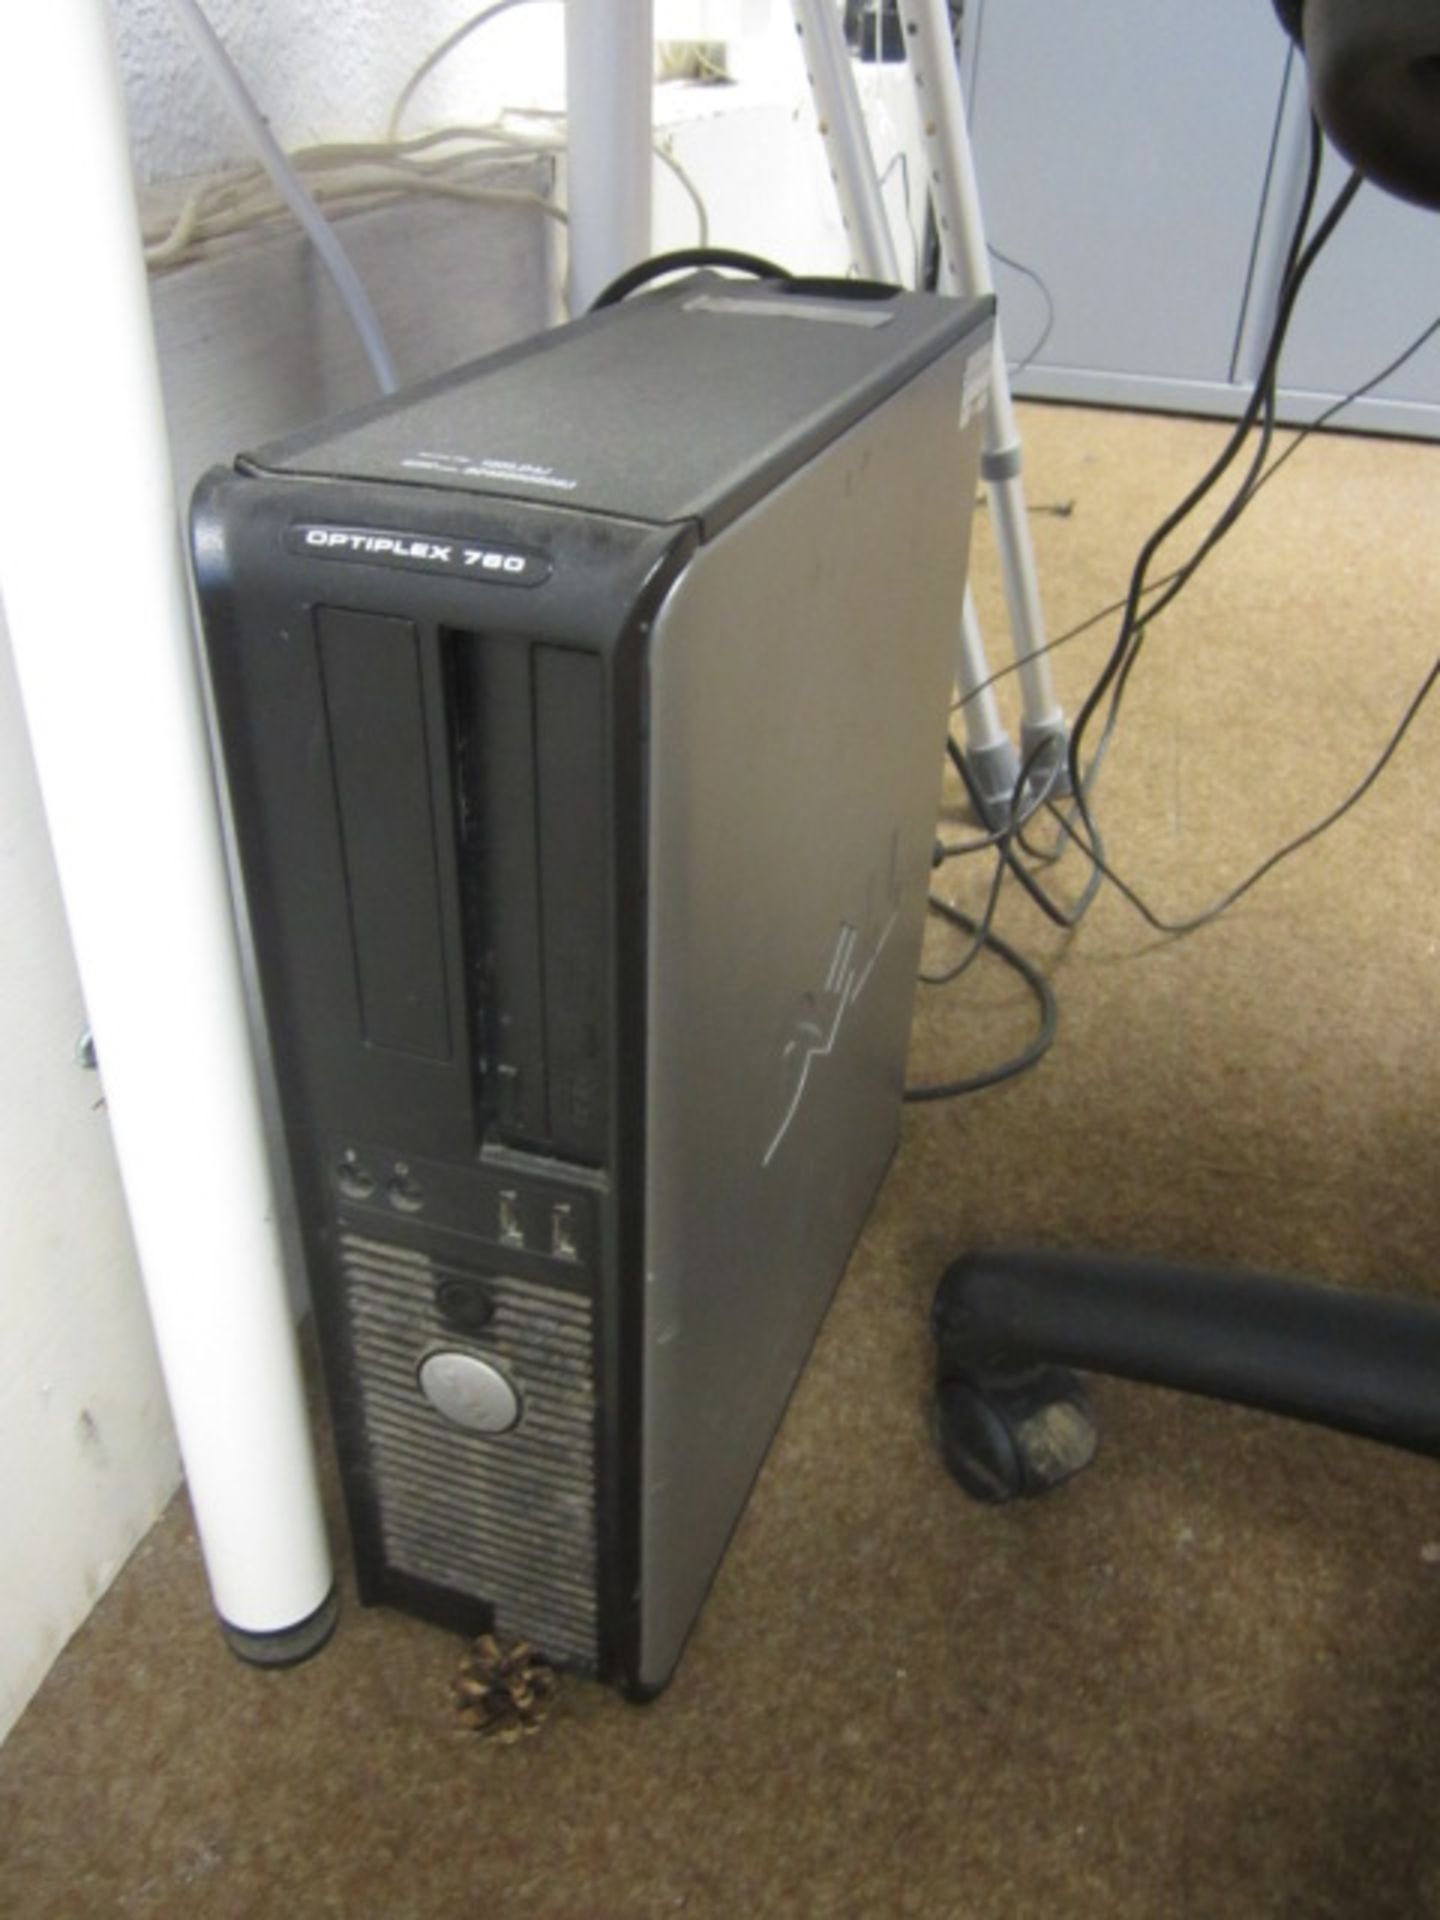 Dell Optiplex 760 computer system, Dell TFT, keyboard, mouse - Image 2 of 2